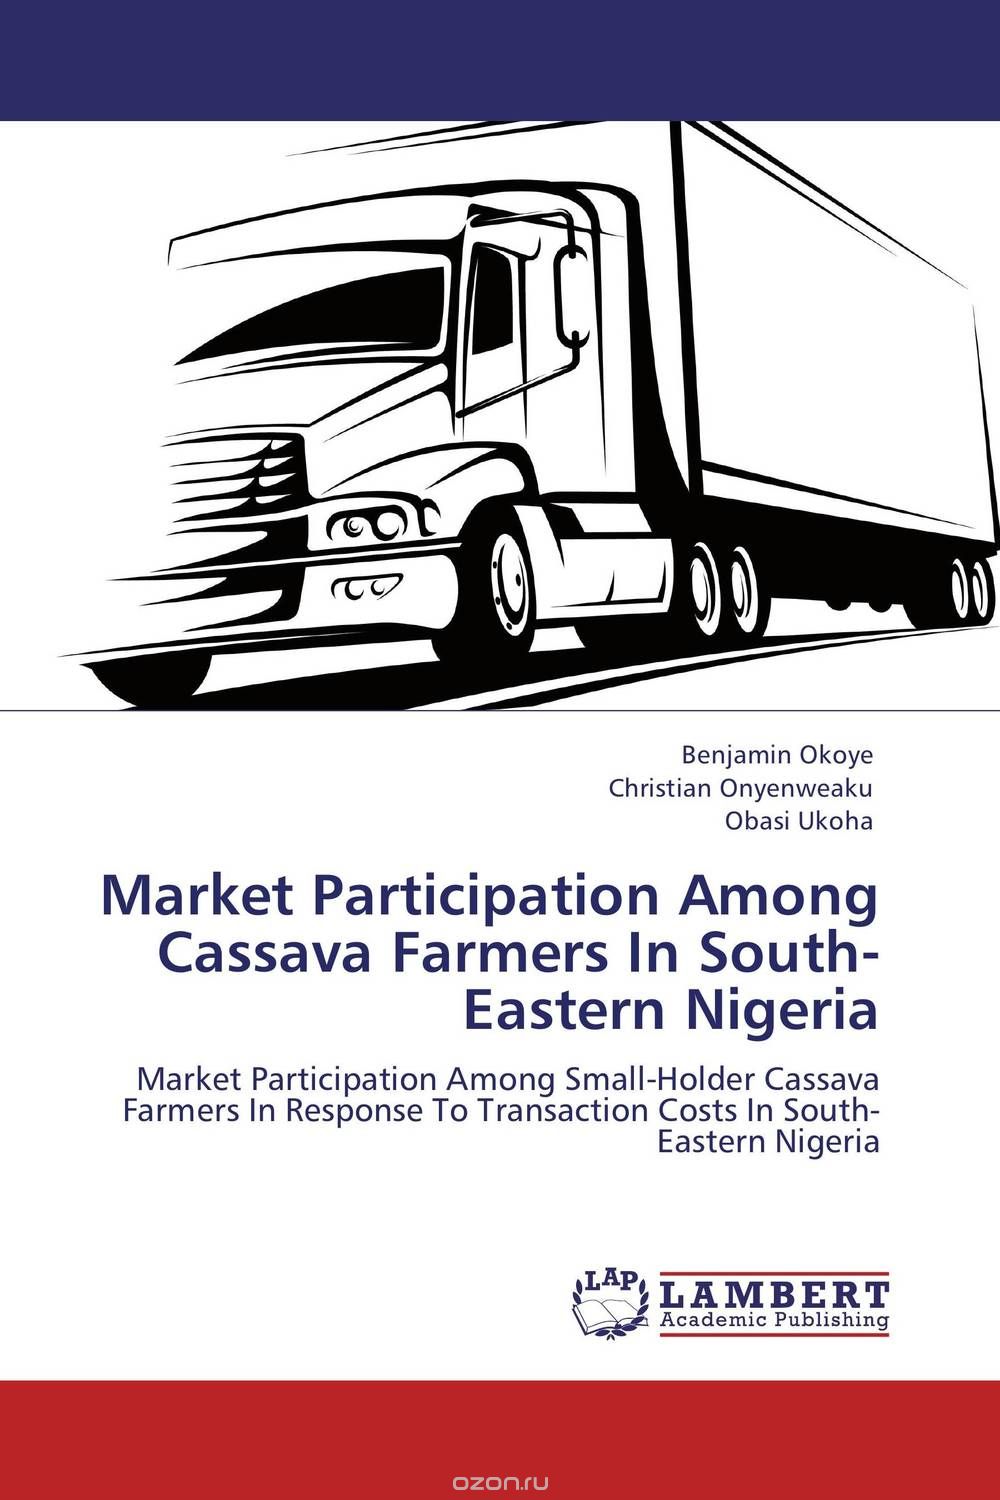 Market Participation Among Cassava Farmers In South-Eastern Nigeria